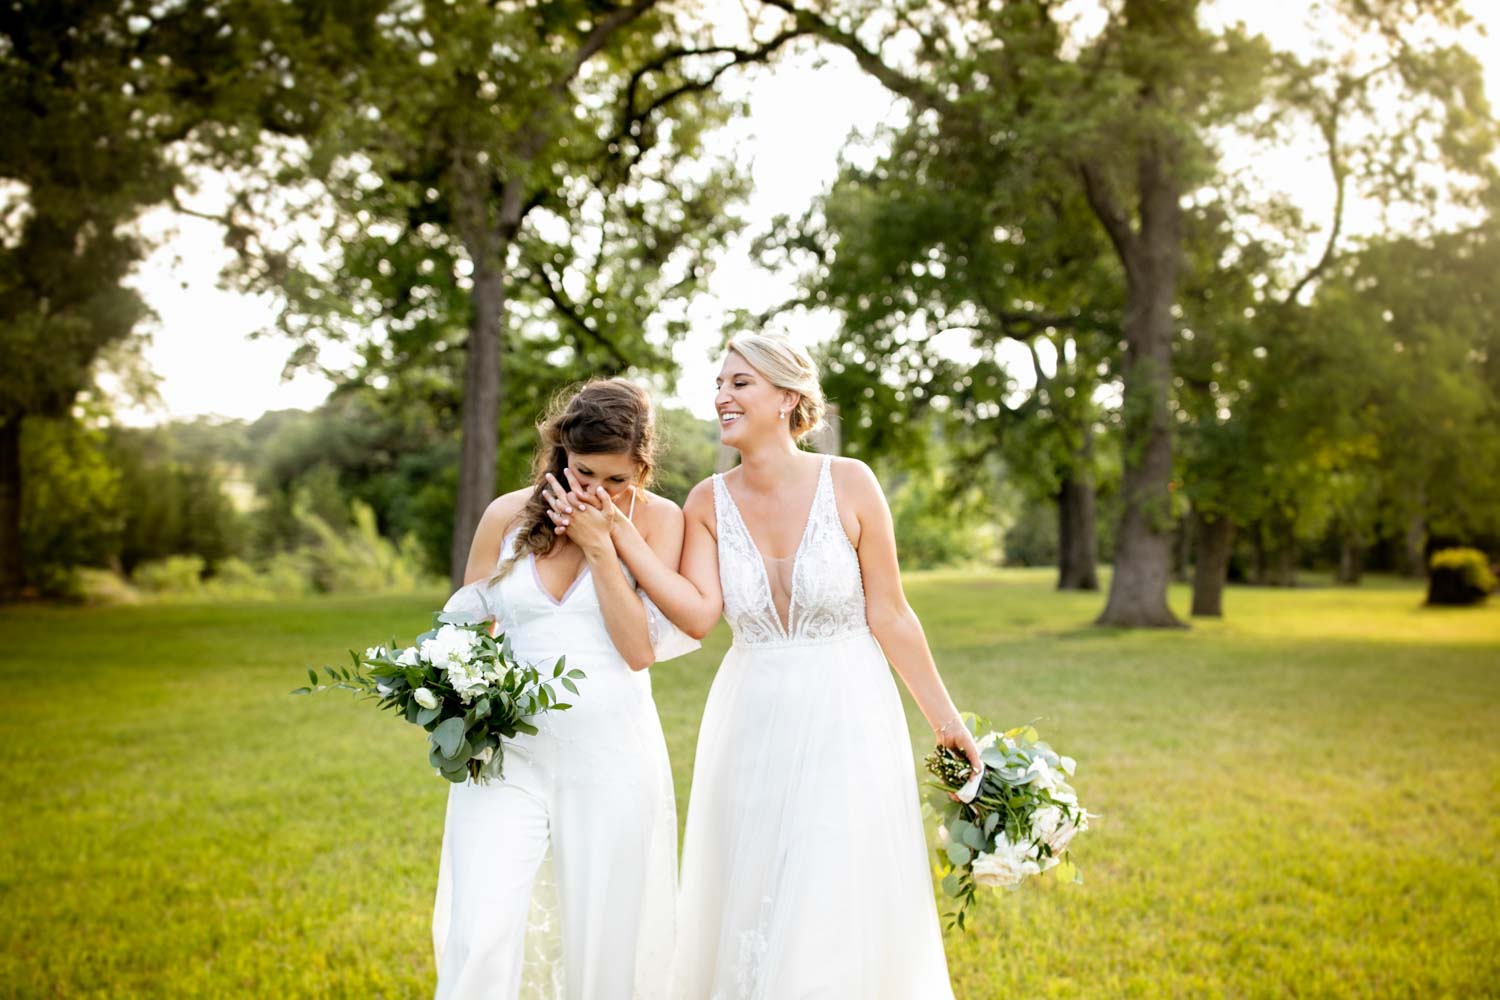 Meagan and Kristyn tied the knot in a luxury outdoor lesbian wedding in Aus...